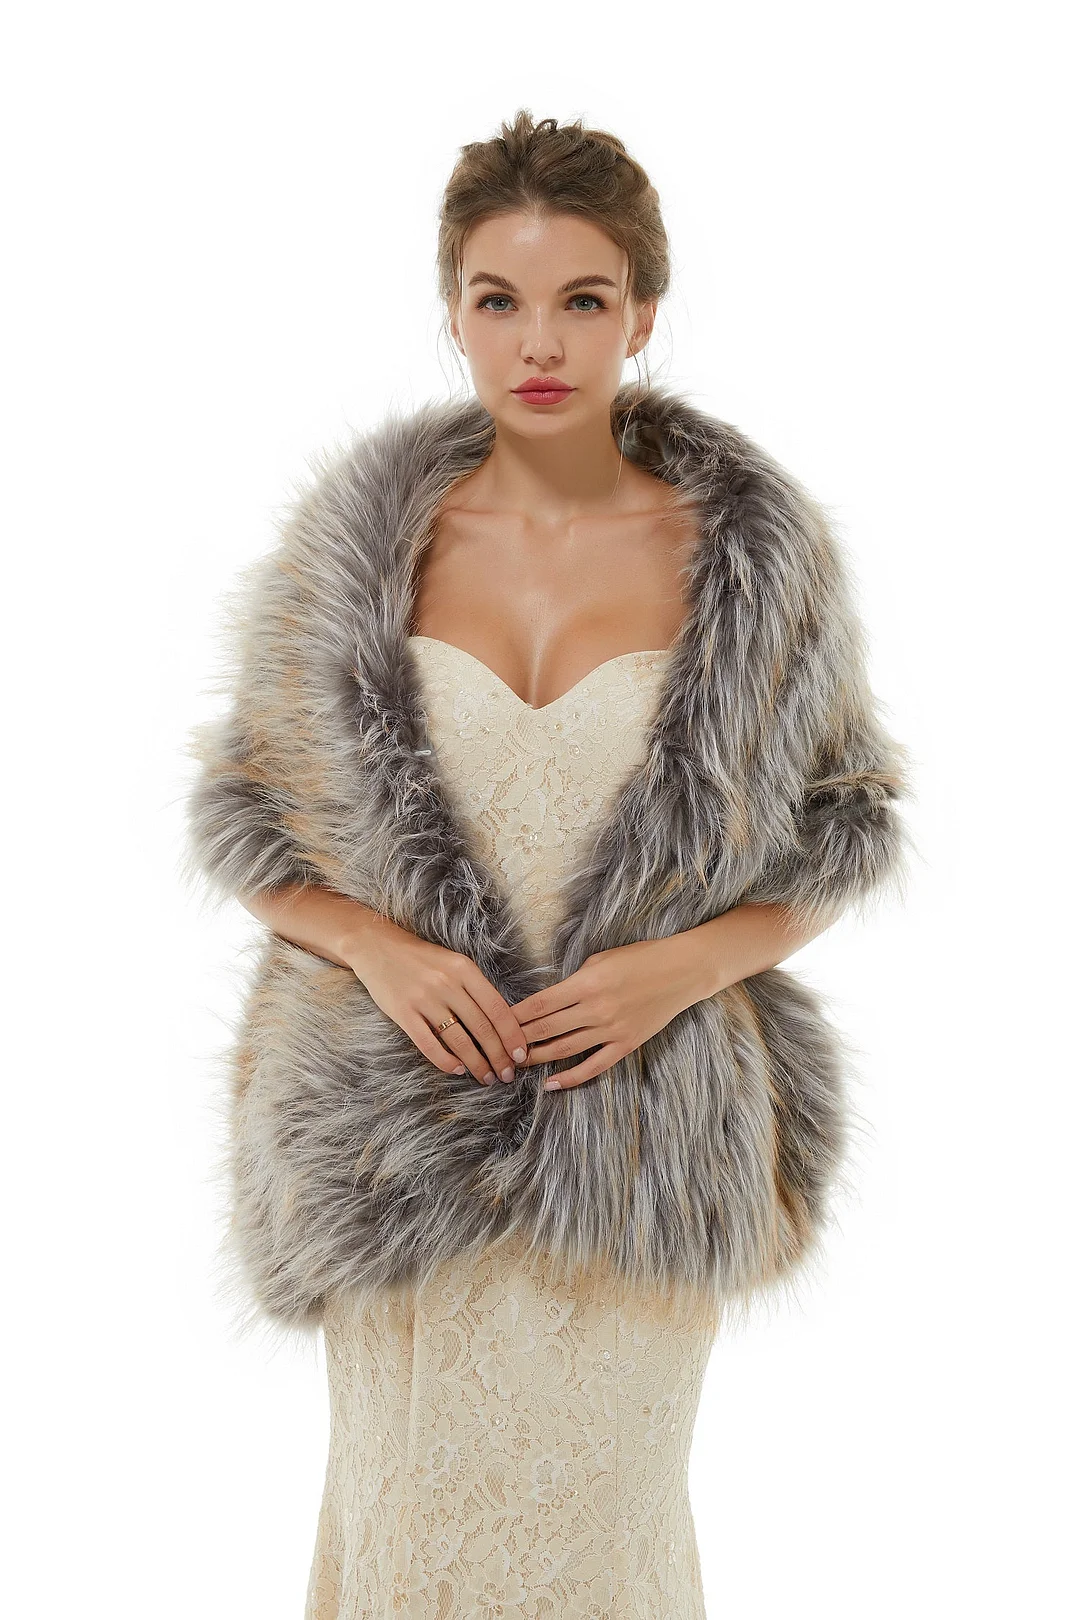 Luluslly Mix Colored Winter Faux Fur Wedding Wrap